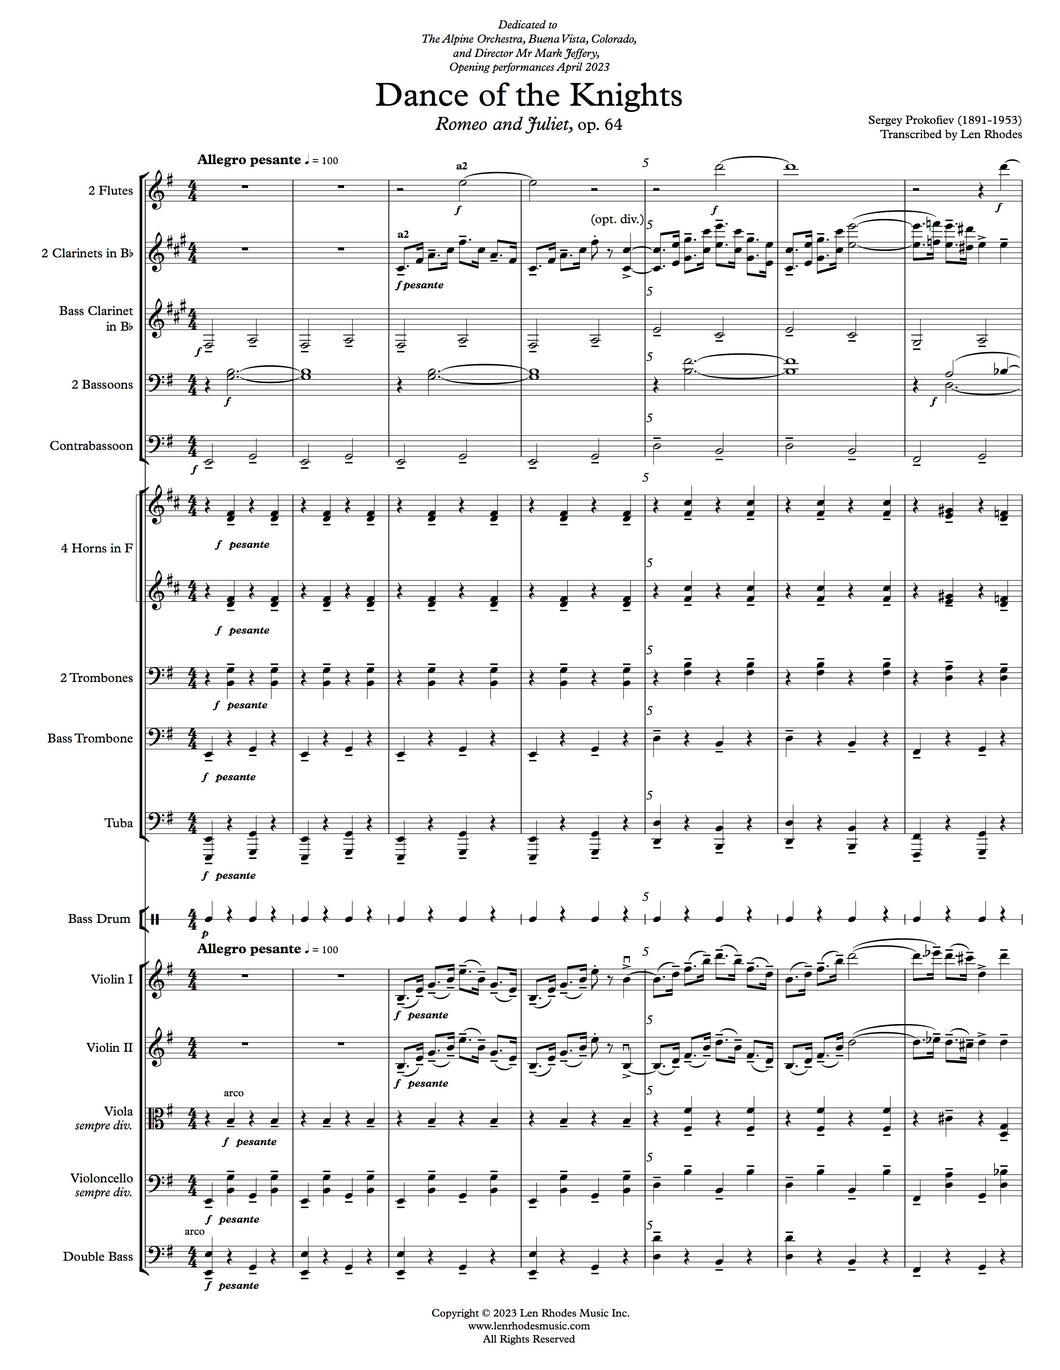 Dance of the Knights, from Romeo and Juliet op.64, Prokofiev - Orchestral Perusal Score